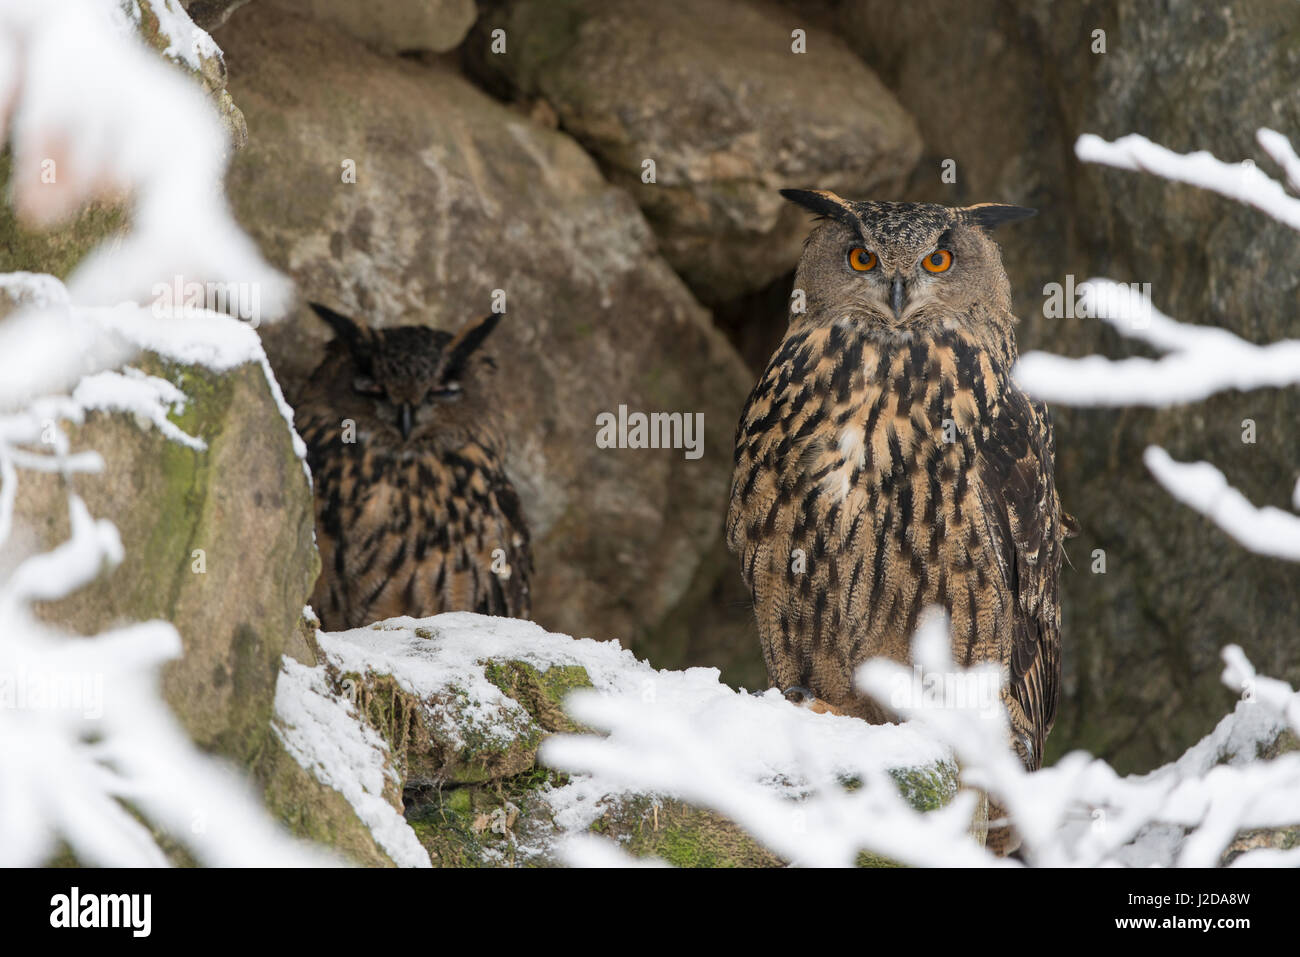 Two eagle-owls sitting on rocks behind snow covered branches Stock Photo